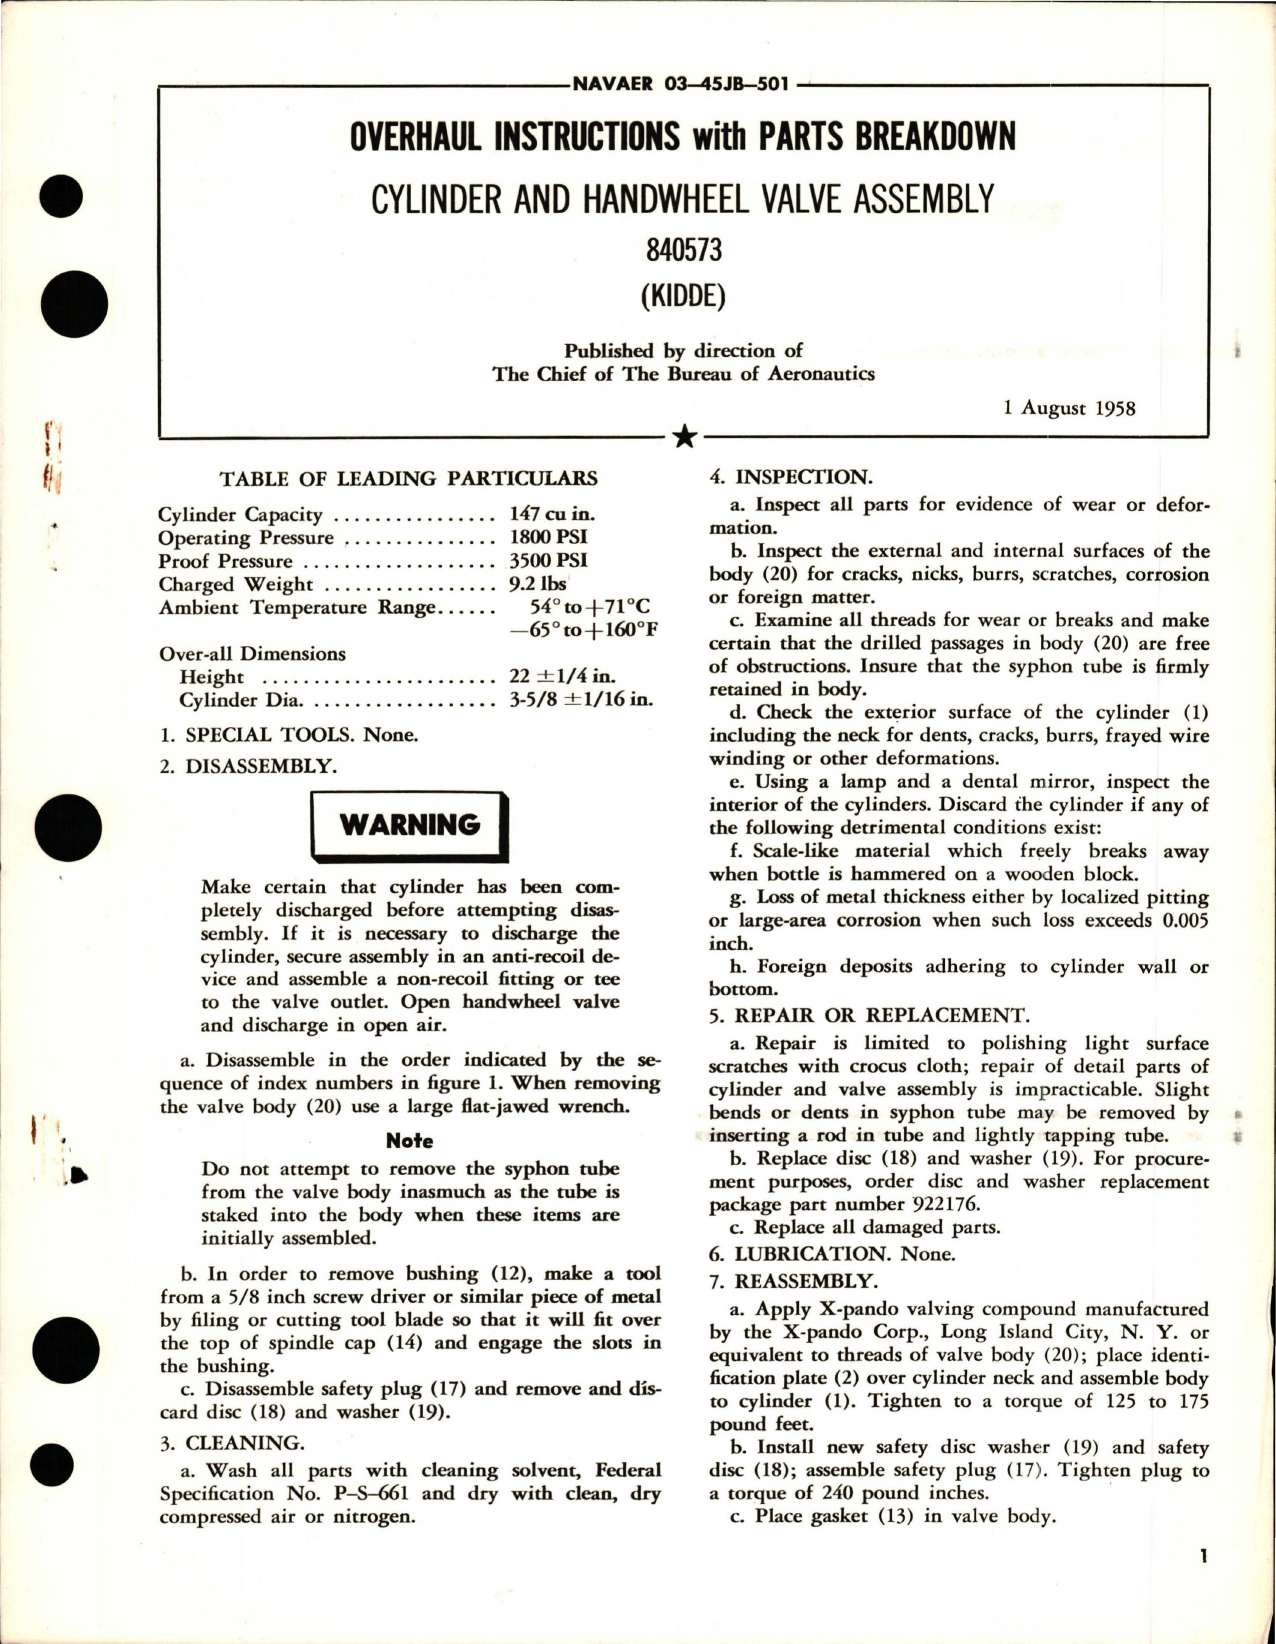 Sample page 1 from AirCorps Library document: Overhaul Instructions with Parts Breakdown for Cylinder and Handwheel Valve Assembly - 840573